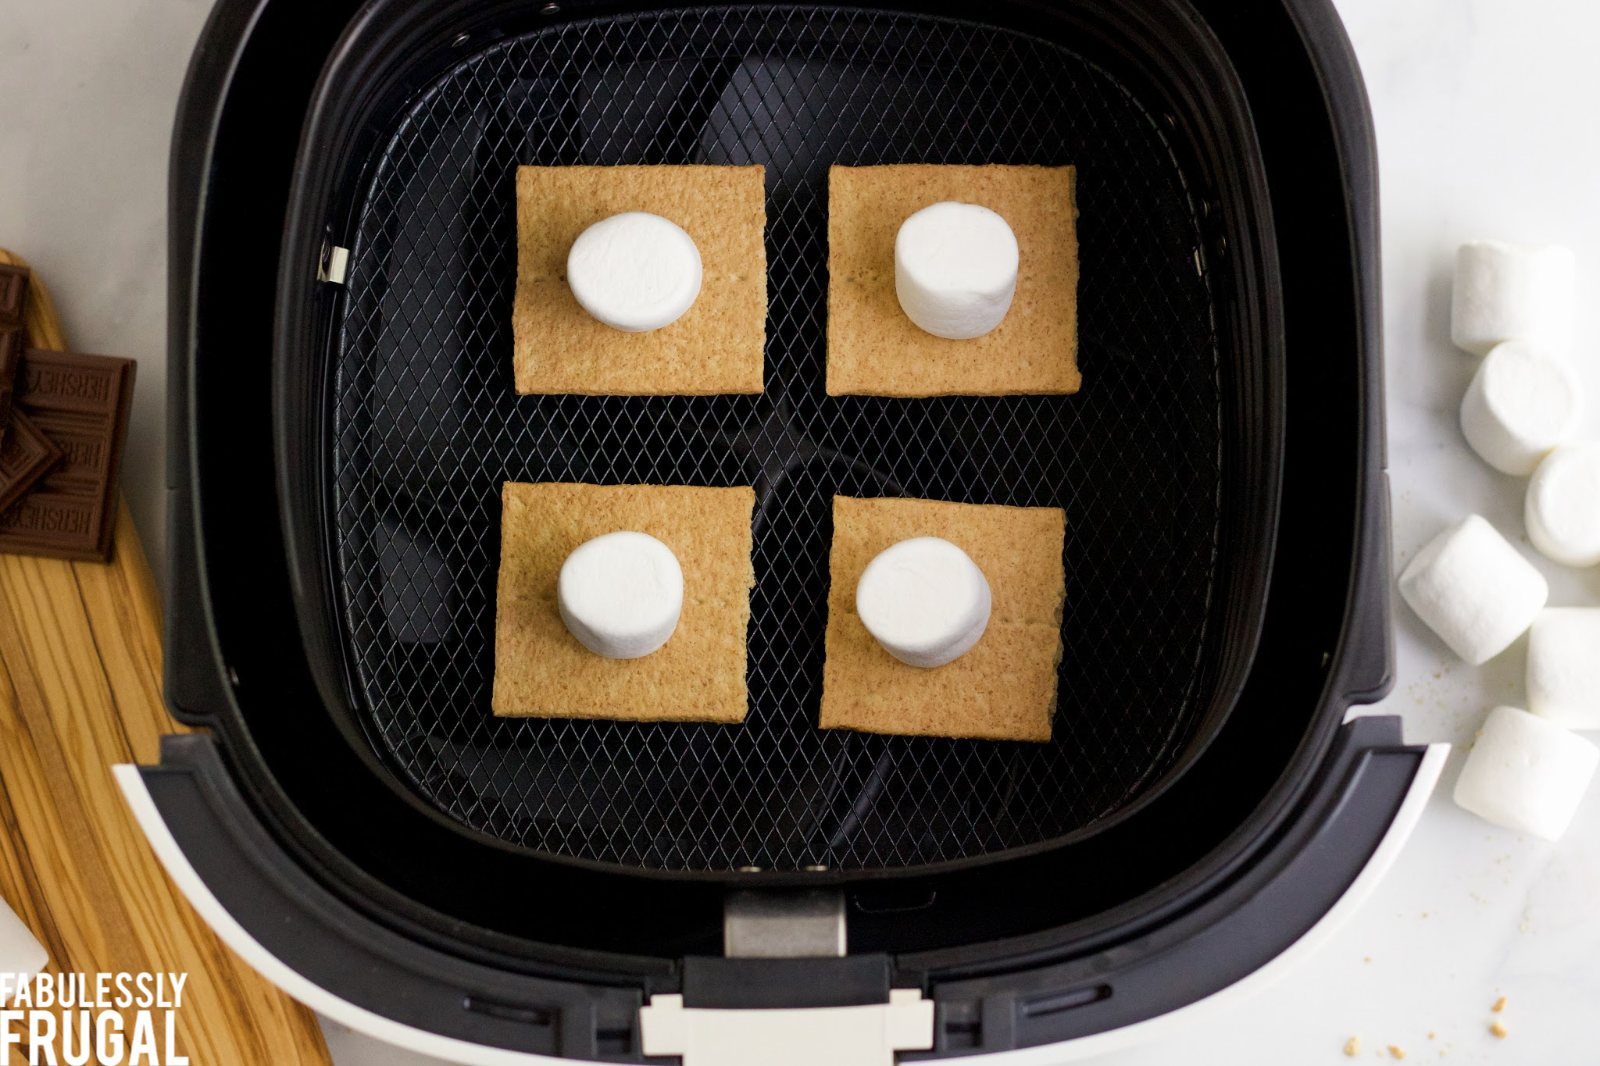 Graham crackers topped with marshmallows in air fryer